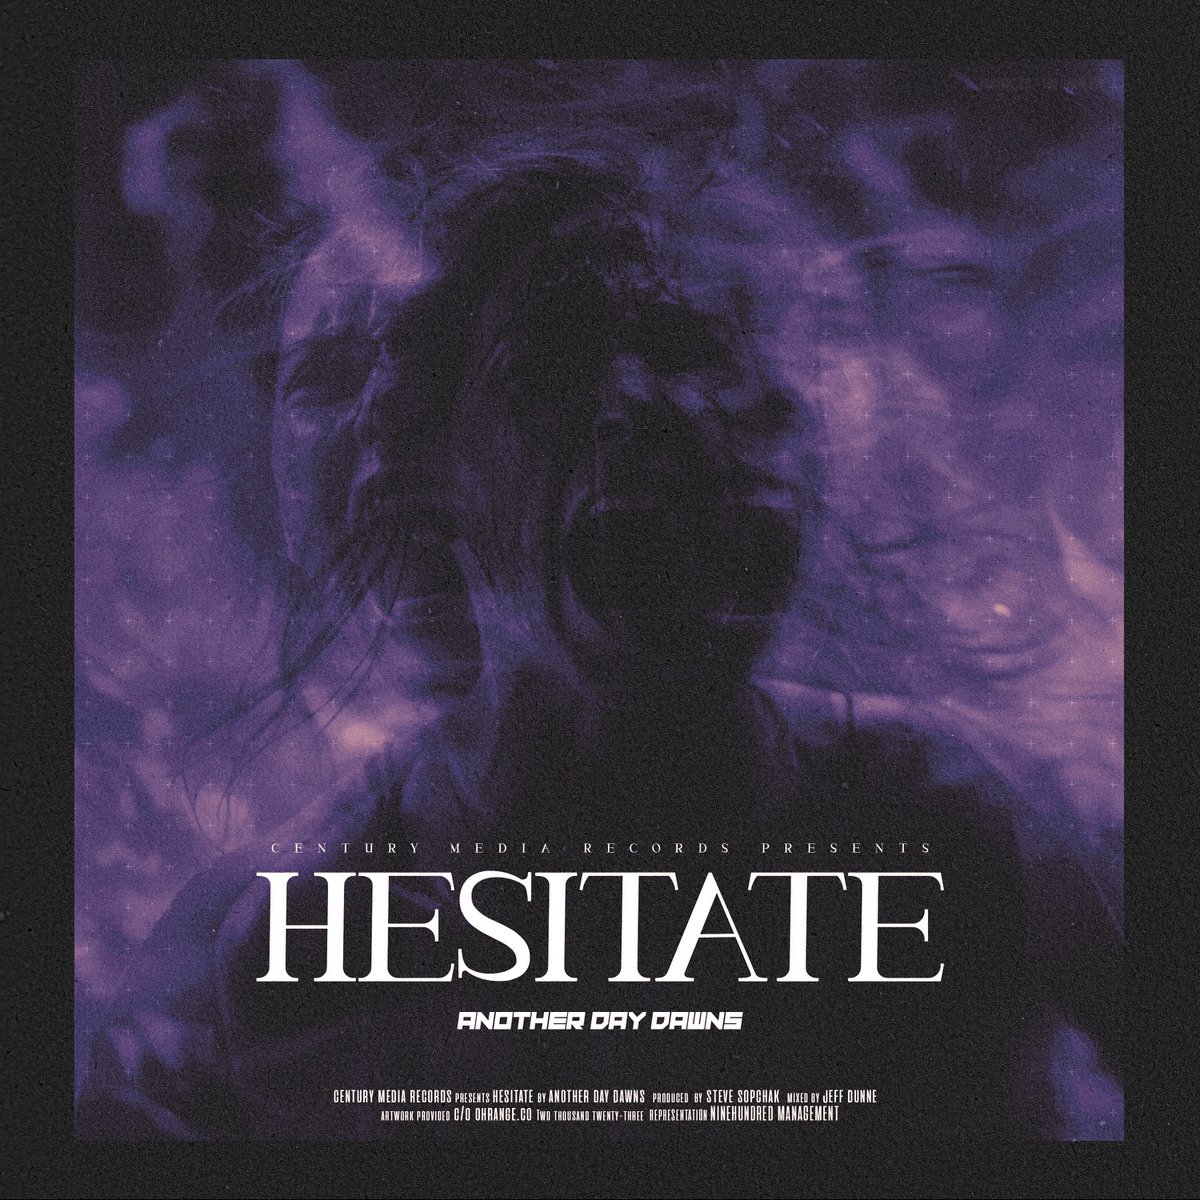 Hesitate drops at Midnight tonight on all DSP's! Who has Pre-Saved the track and will be listening tonight! forms.sonymusicfans.com/campaign/anoth…